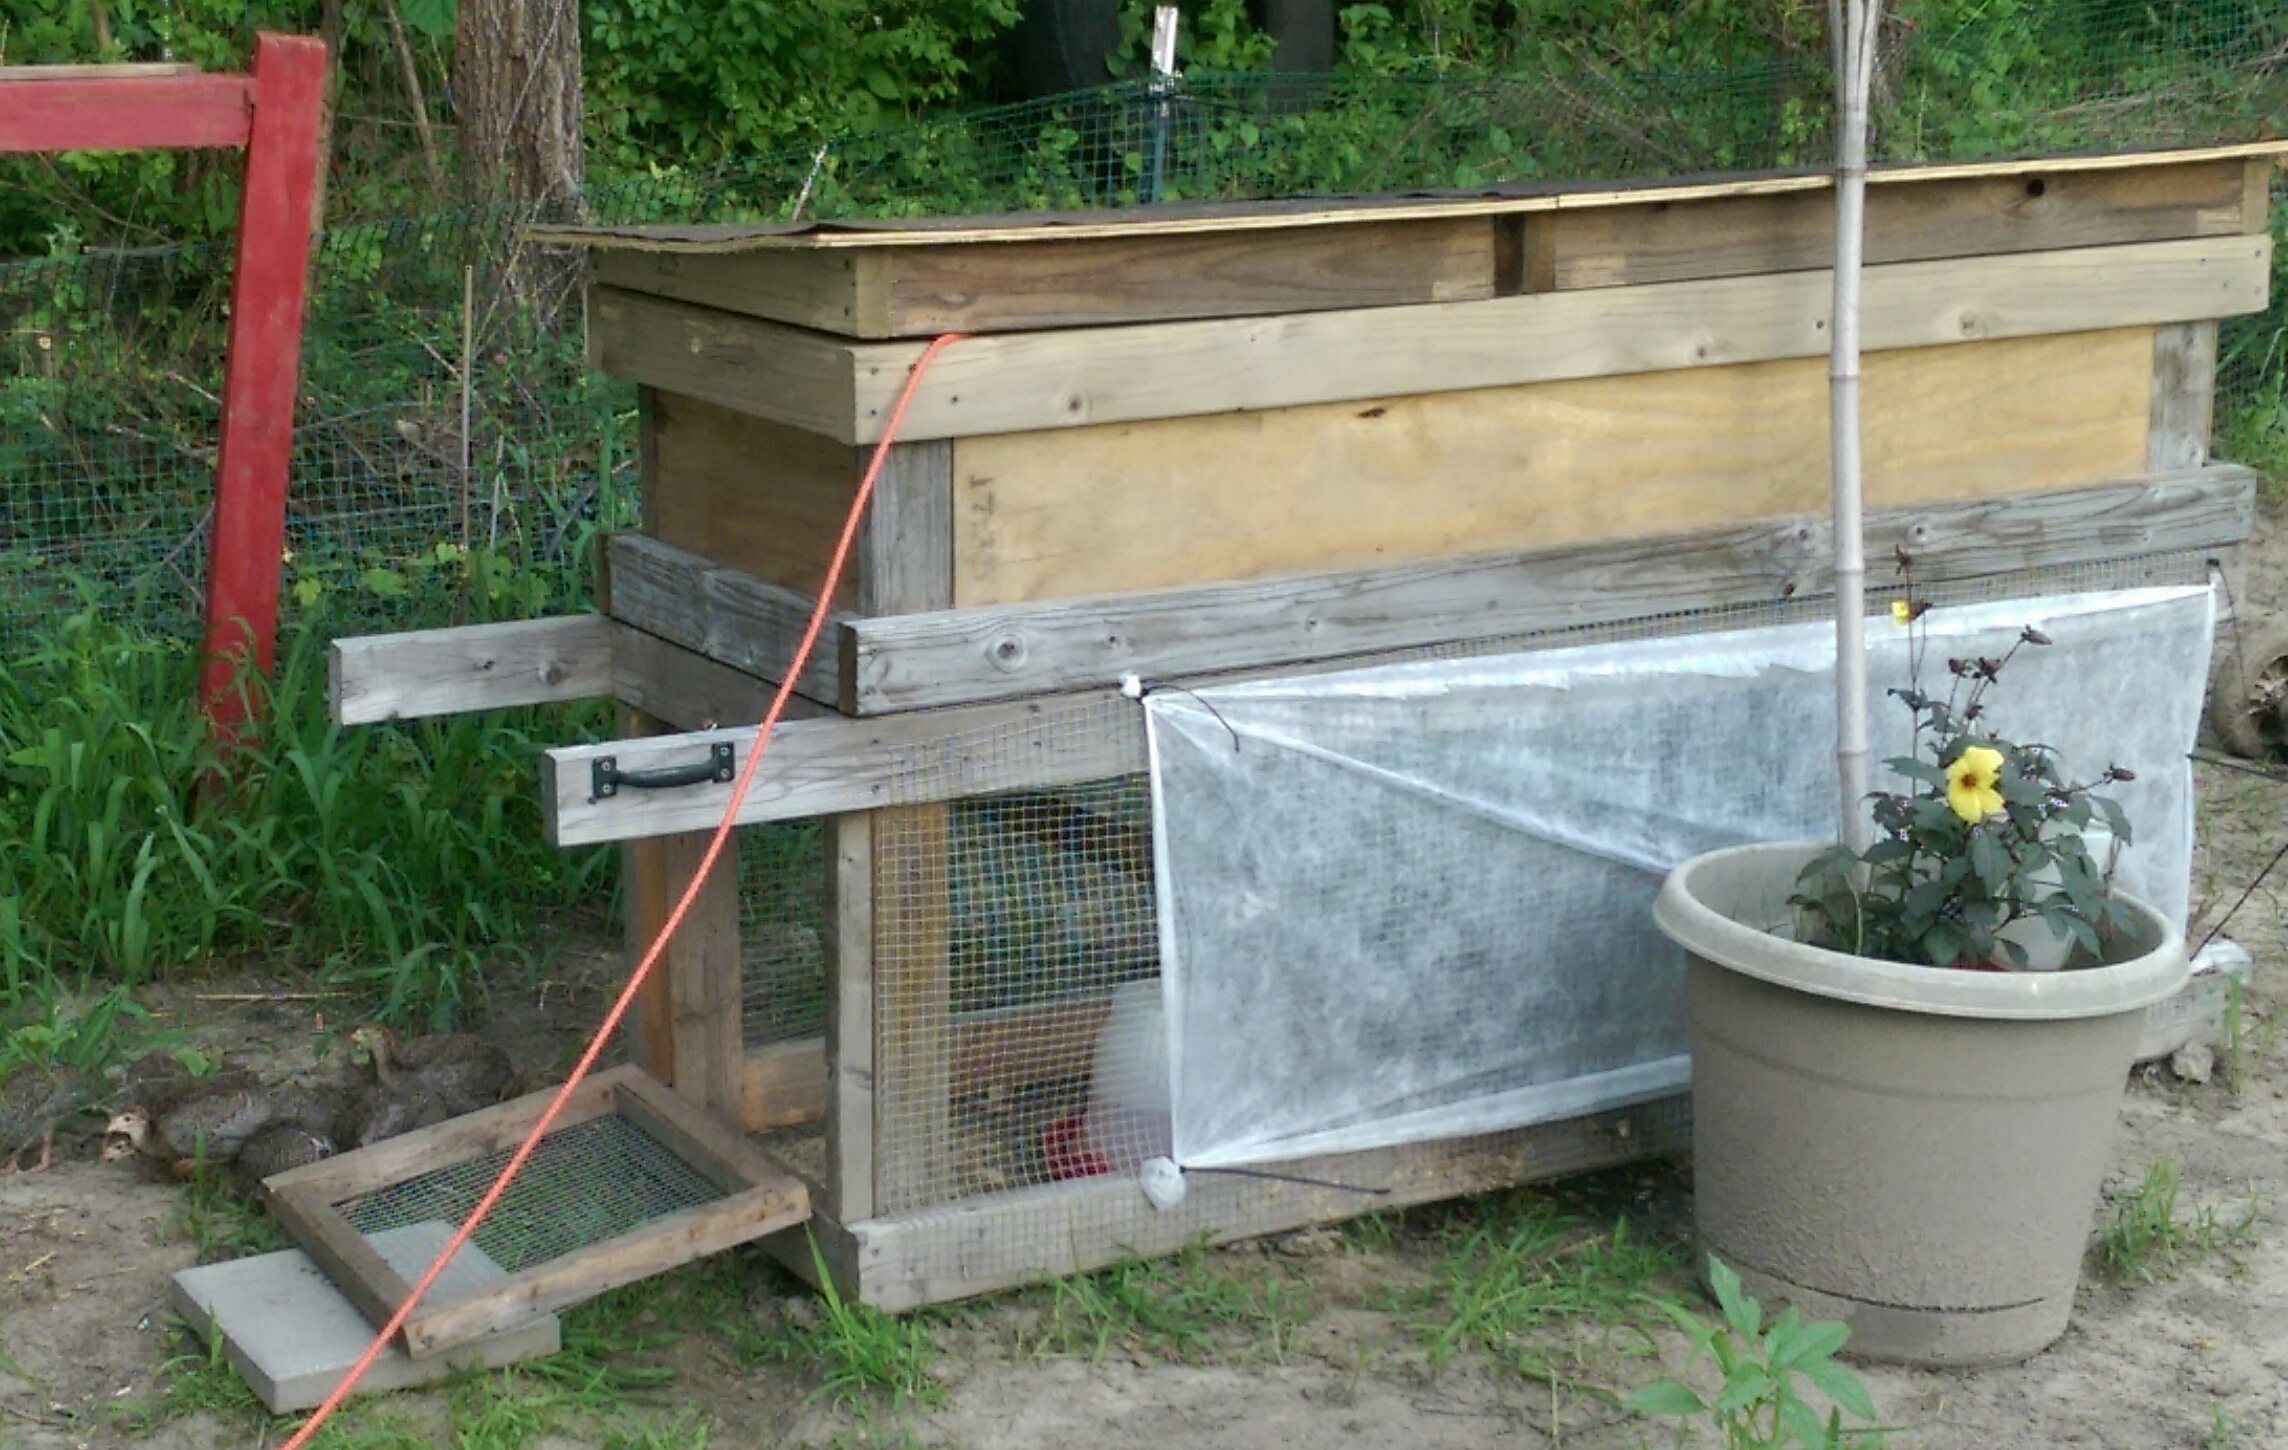 Here is a picture of my week 3-4 outdoor brooder.